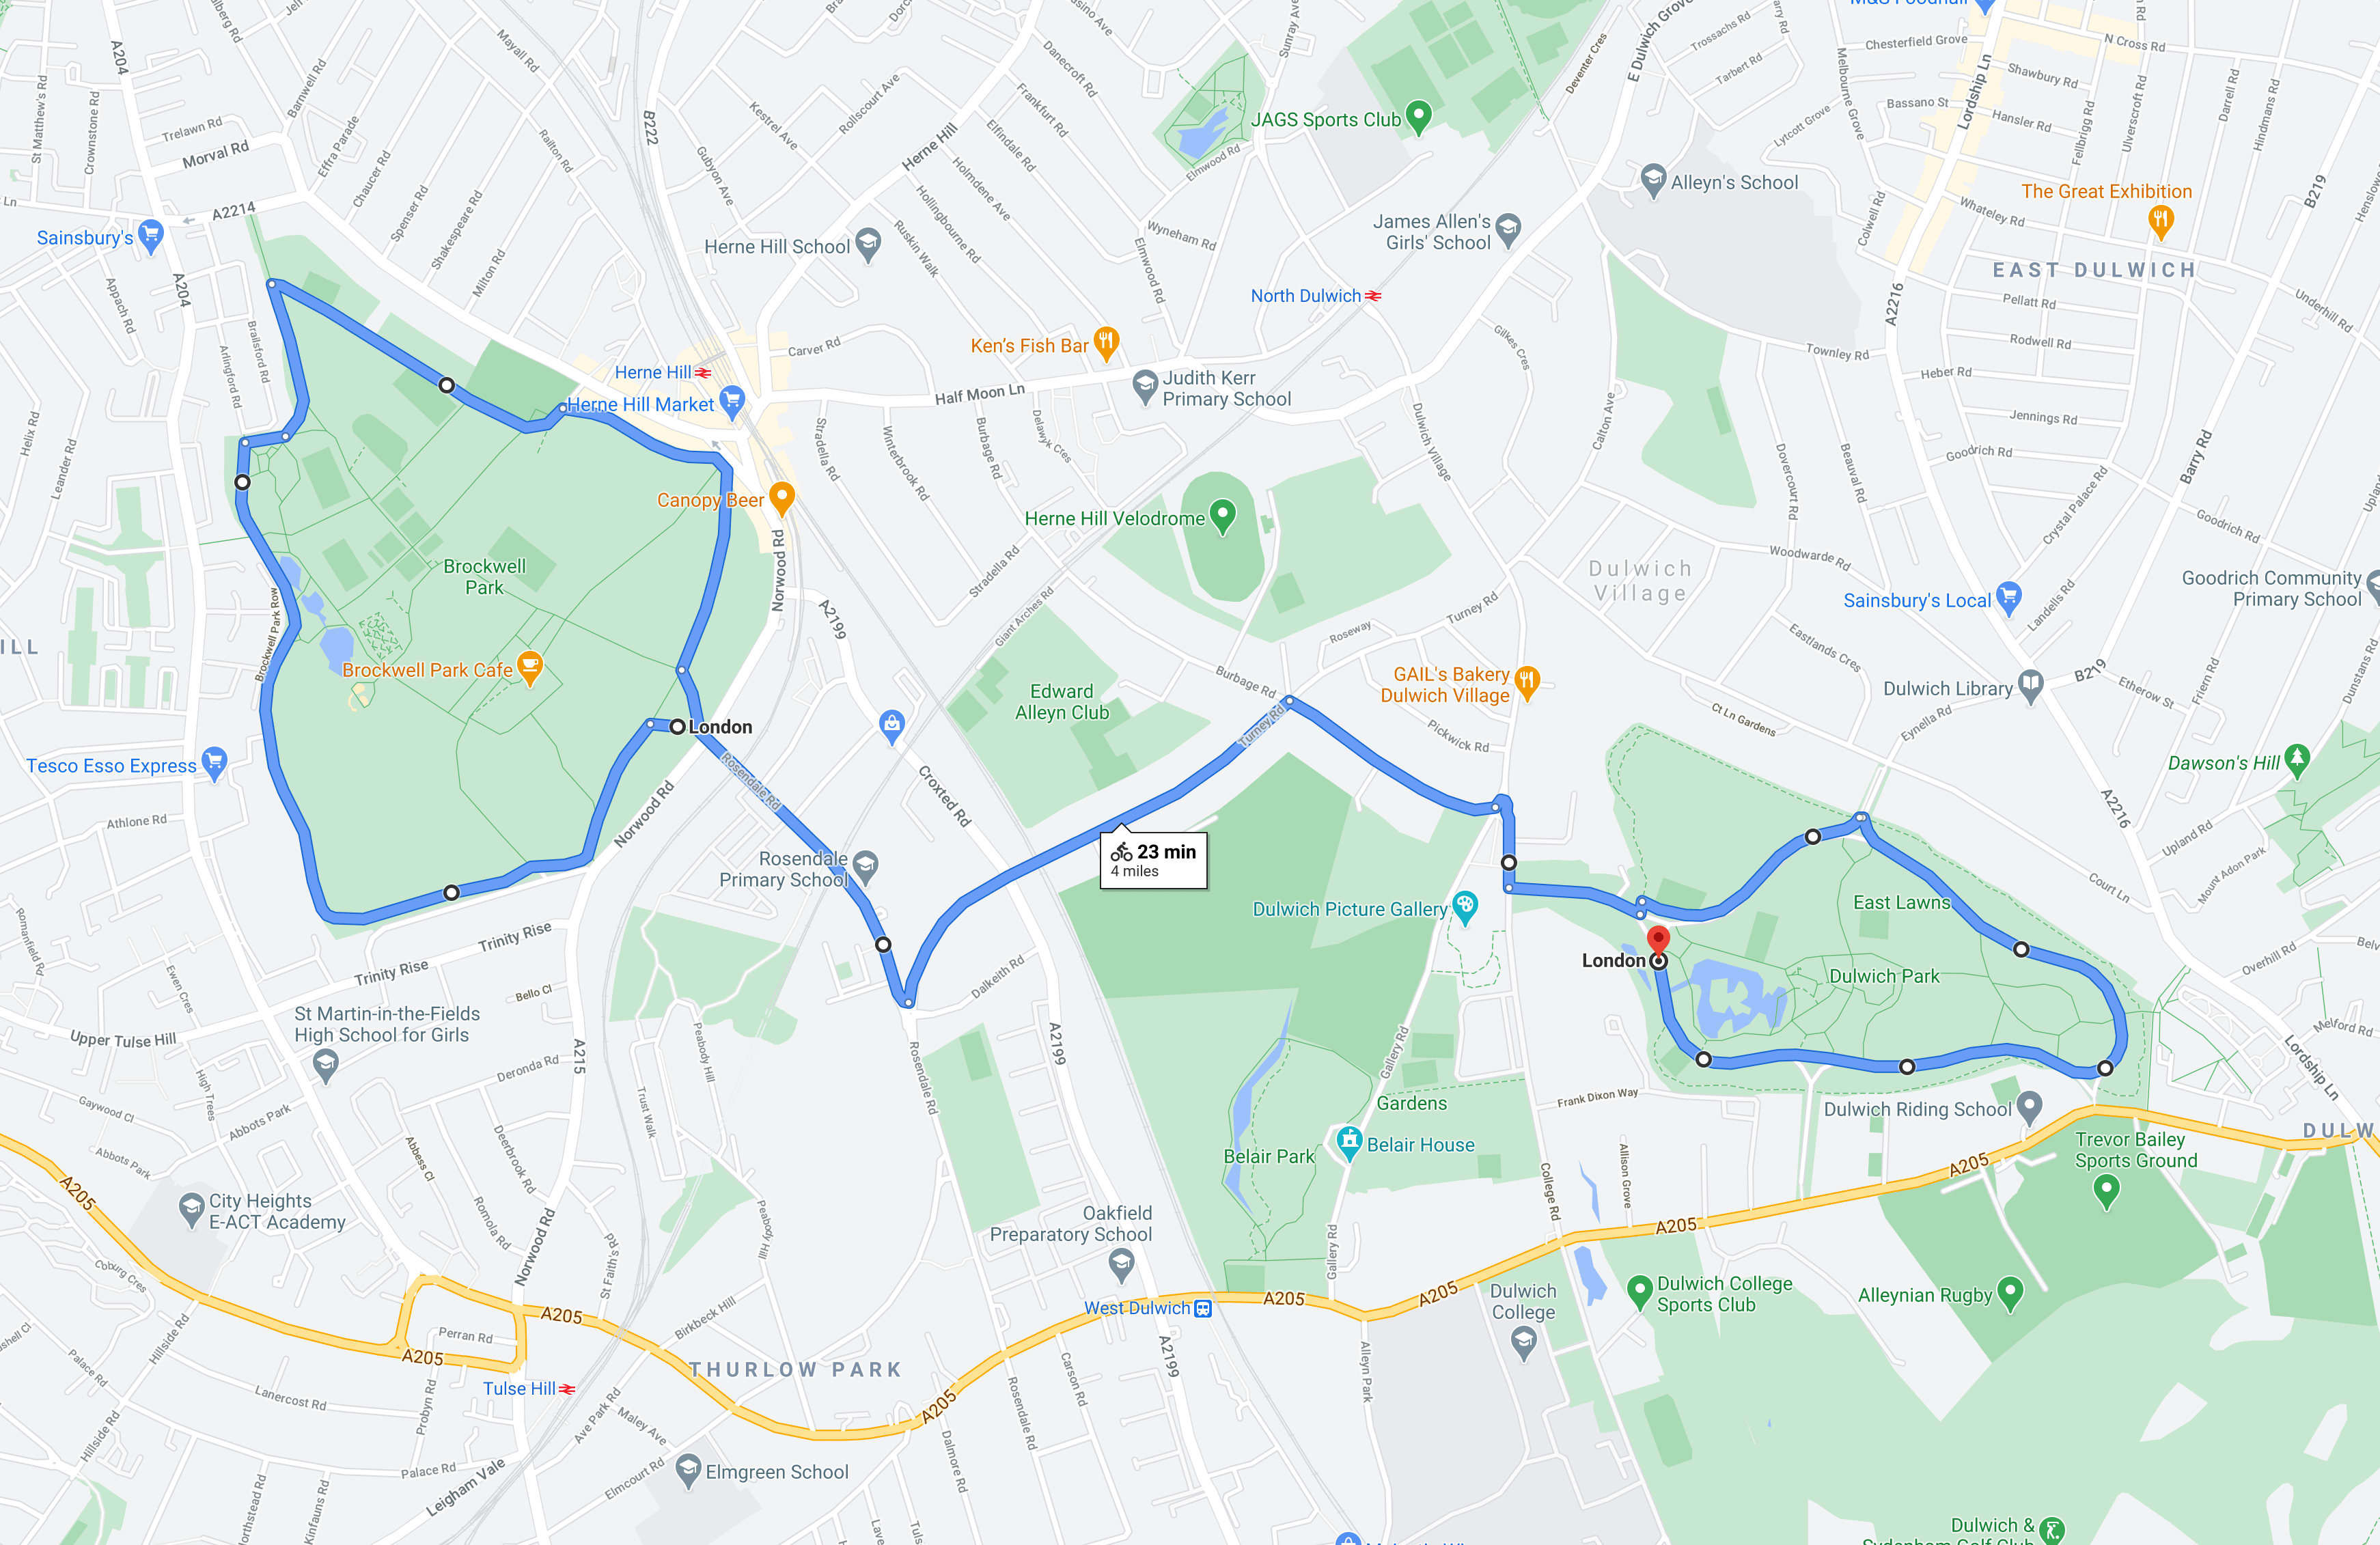 Dulwich Park and Brockwell Park cycle route